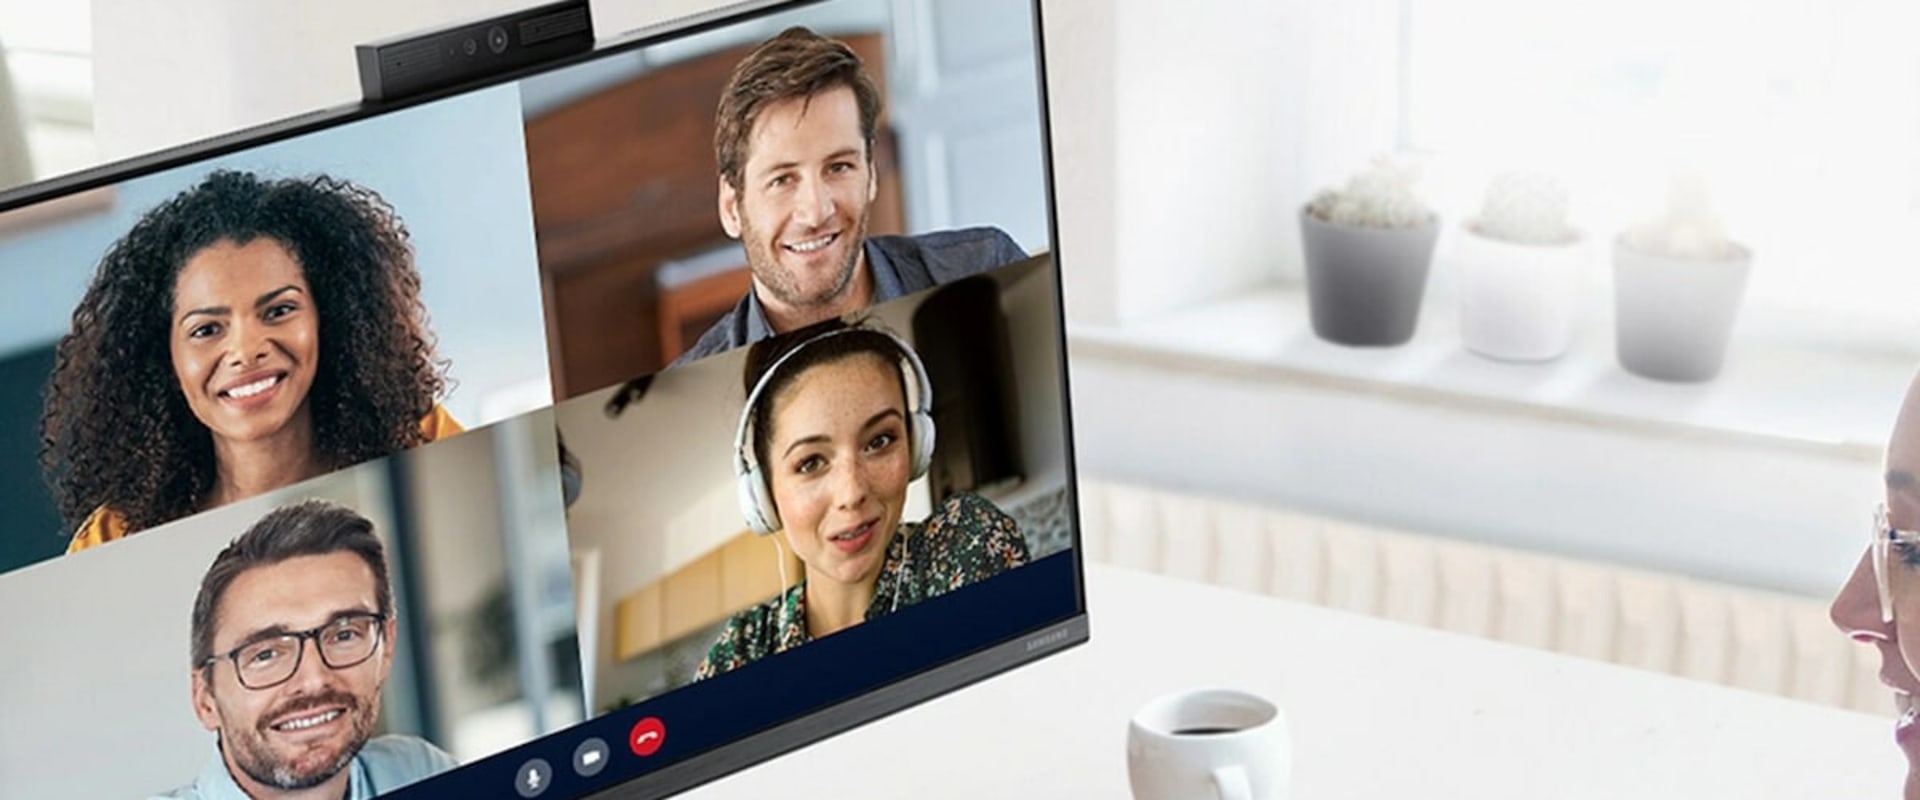 Everything You Need to Know About Built-In Webcams